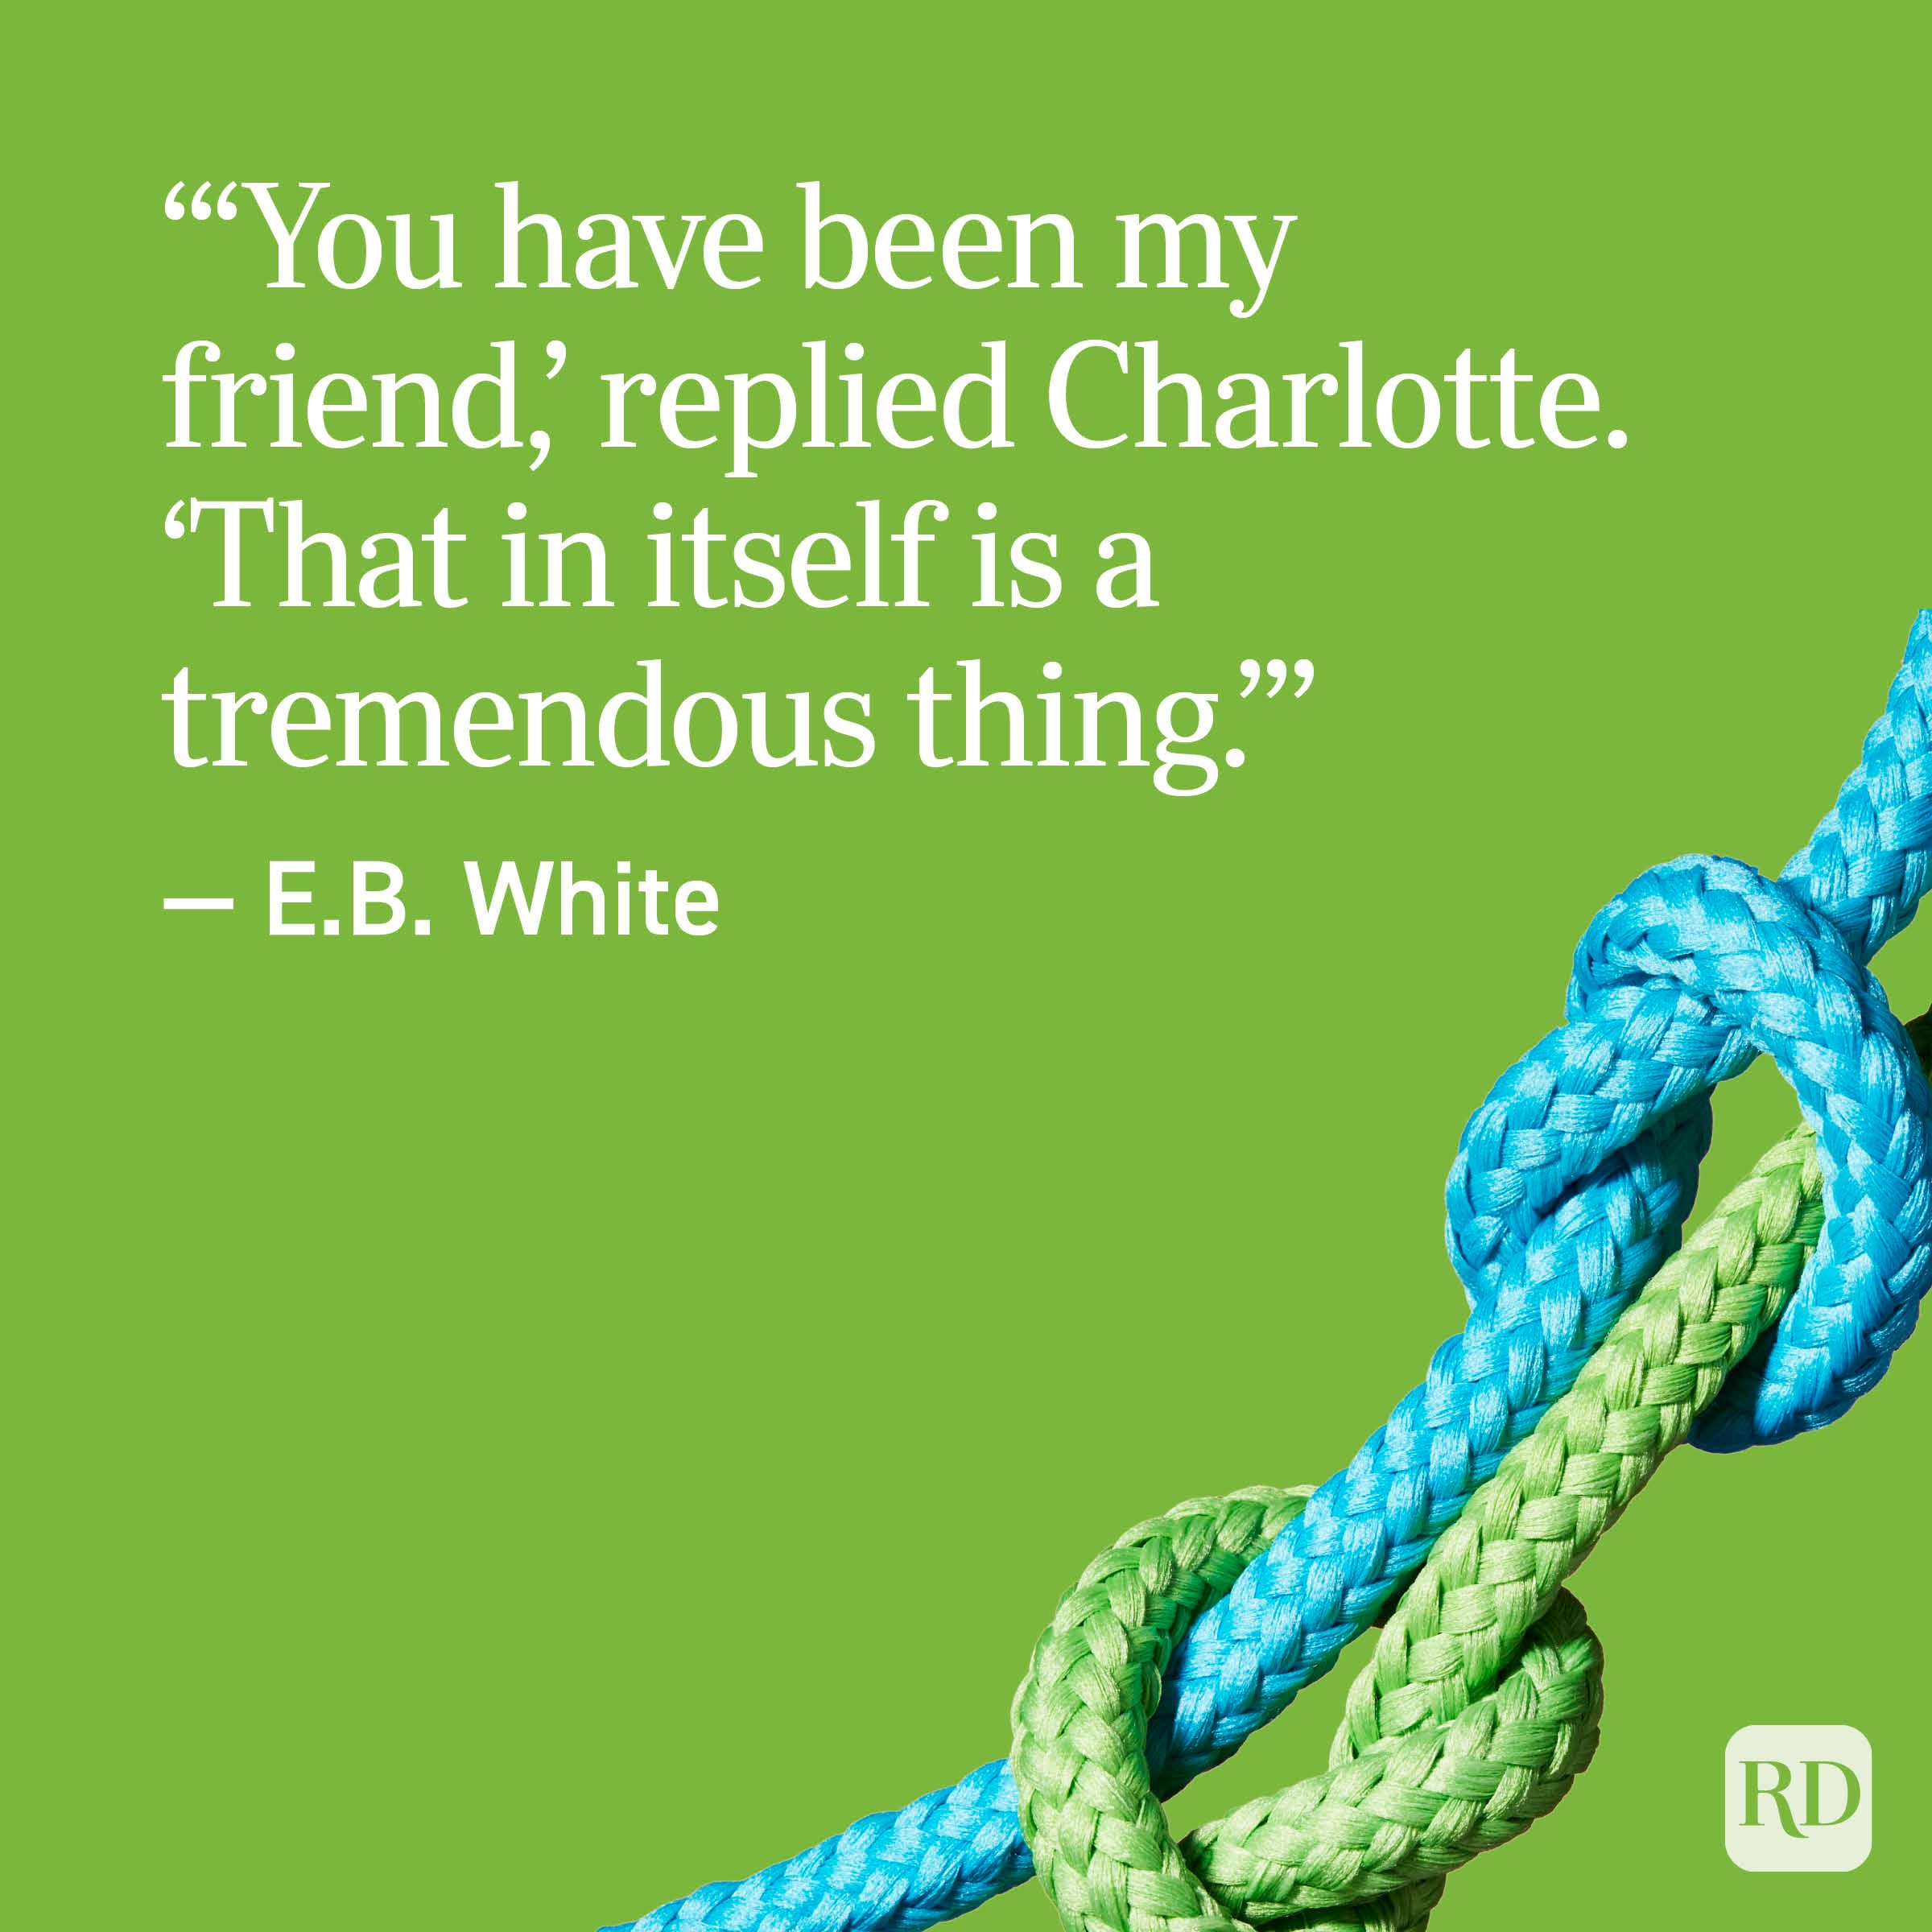 “‘You have been my friend,’ replied Charlotte. ‘That in itself is a tremendous thing.’” — E.B. White